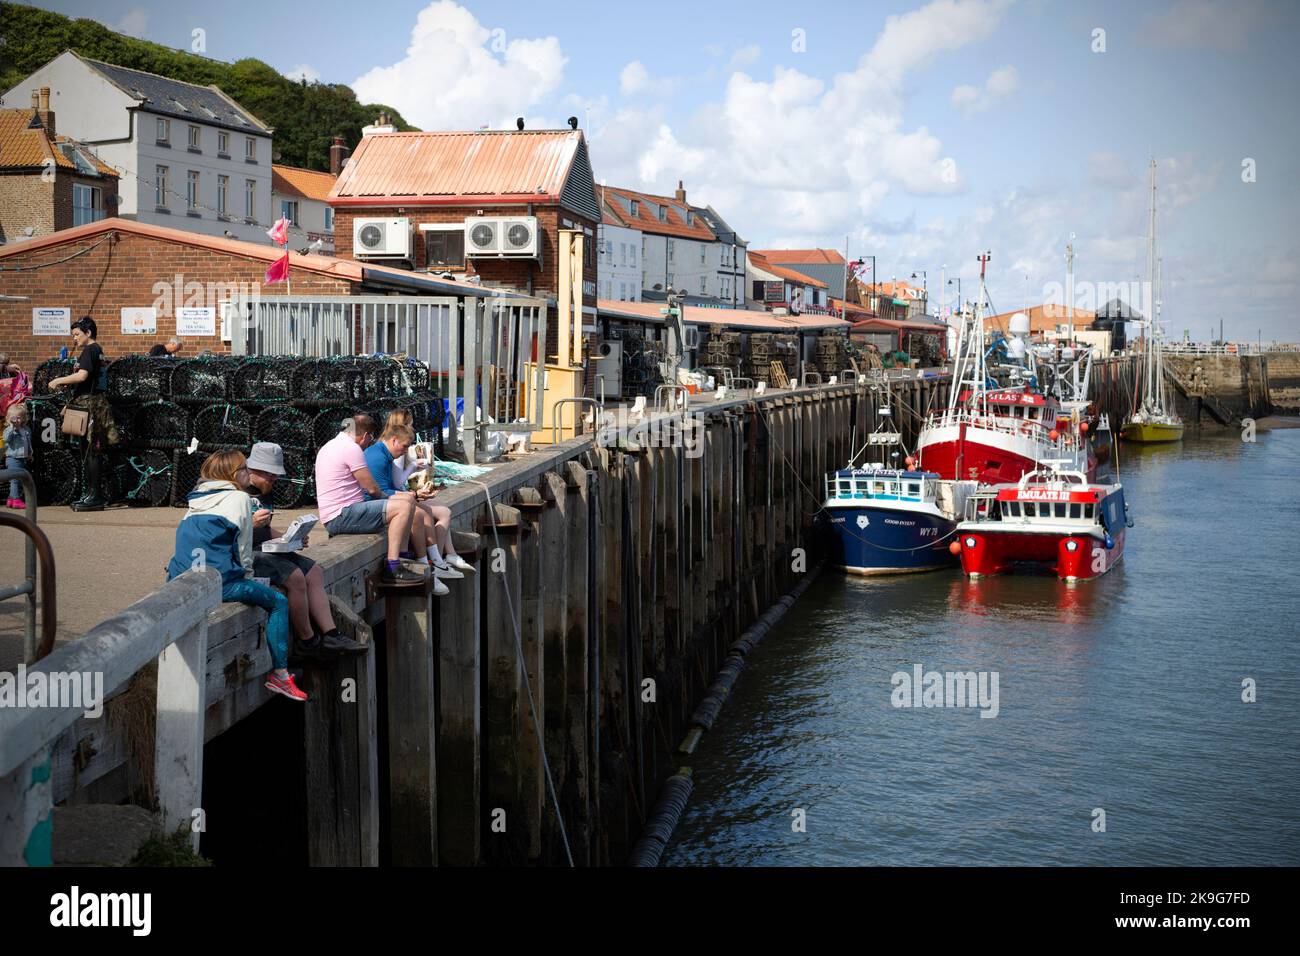 The seaside town of Whitby in North Yorkshire in Northern England. Stock Photo